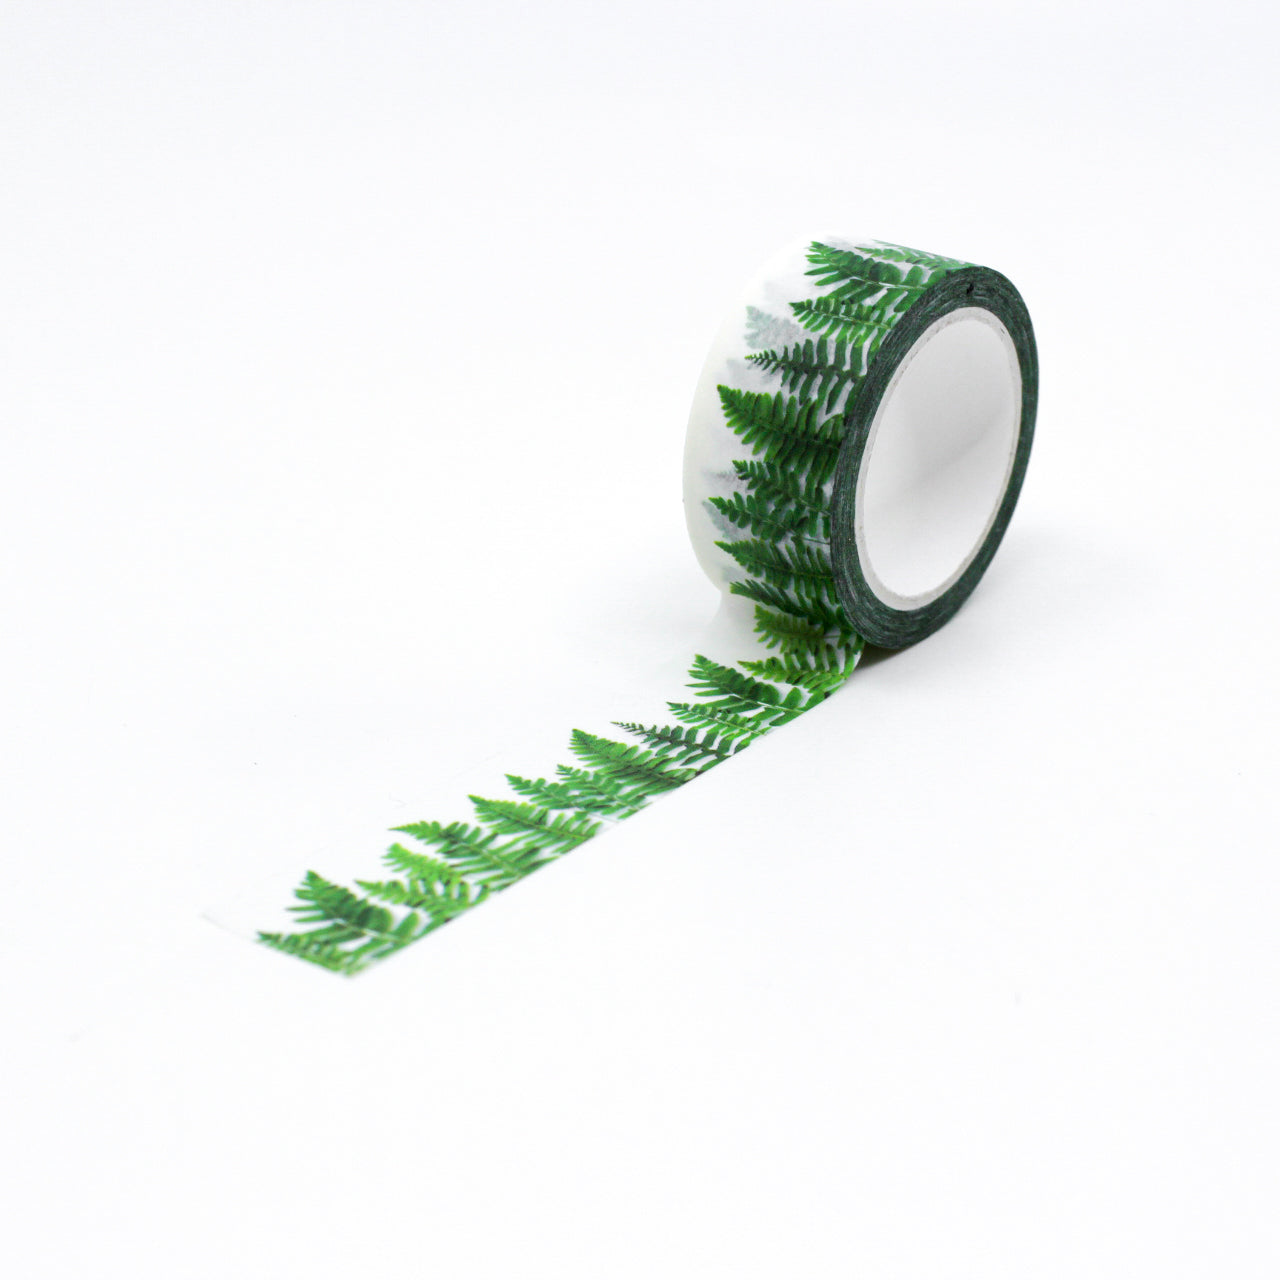 Bring the beauty of nature to your projects with our green ferns washi tape, featuring a captivating pattern of lush and verdant fern leaves. This tape is designed by Bottle Branch and sold at BBB Supplies Craft Shop.